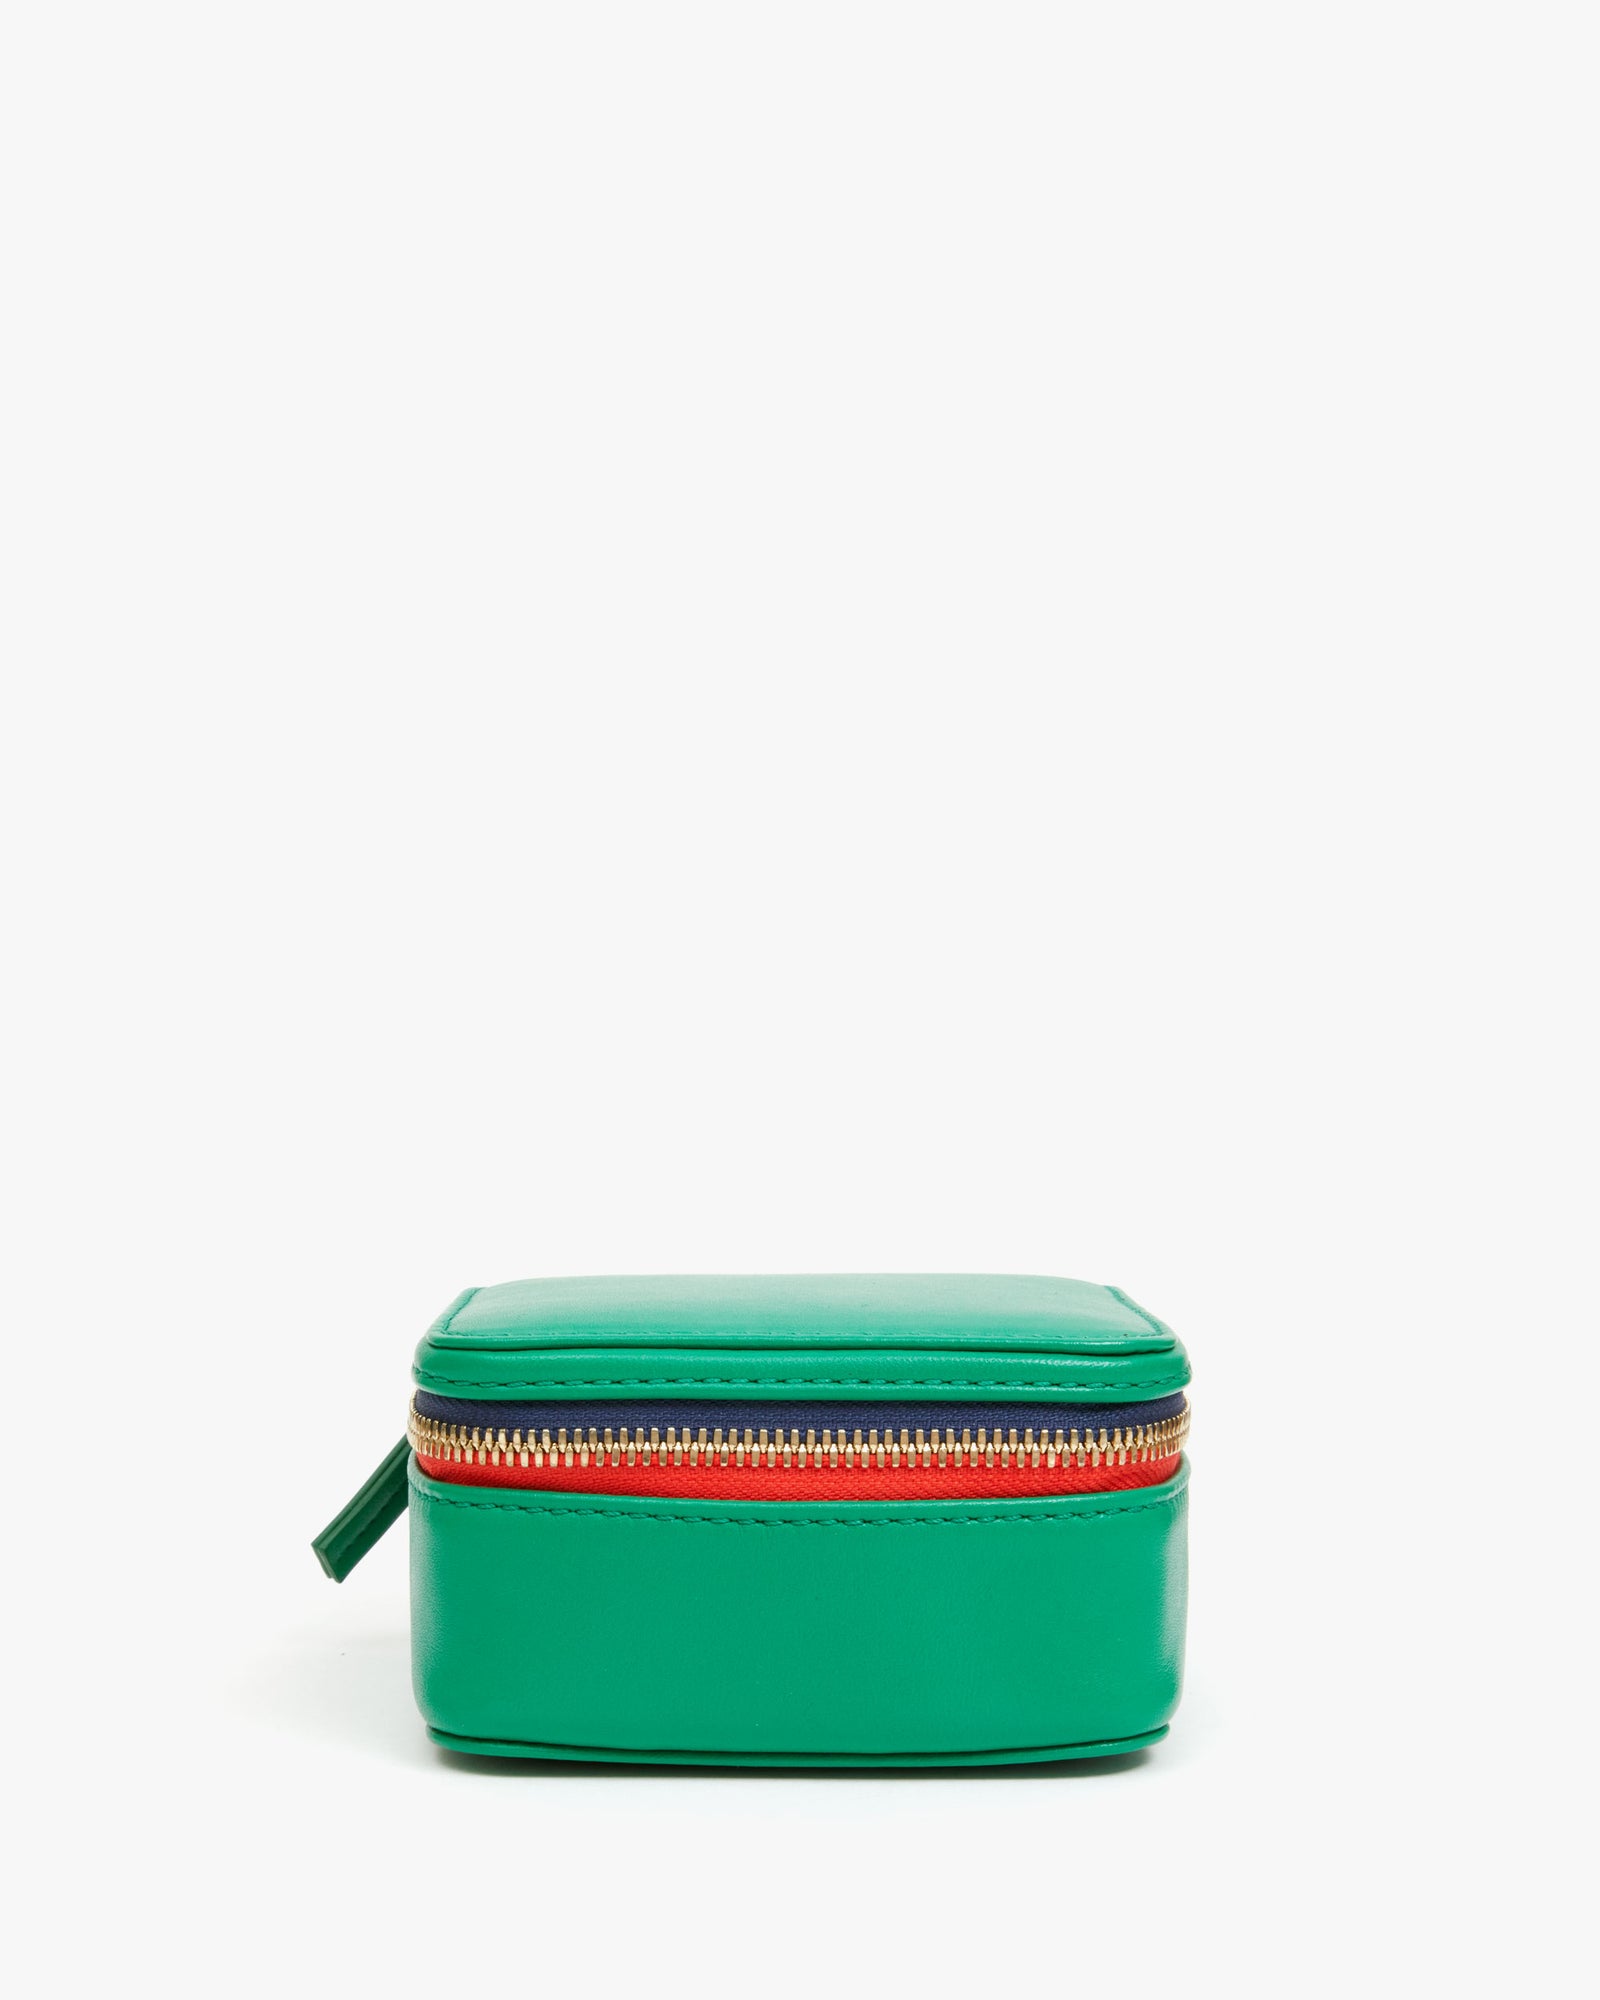 Emerald Nappa Box A Bijoux with a red and navy two tone zipper.